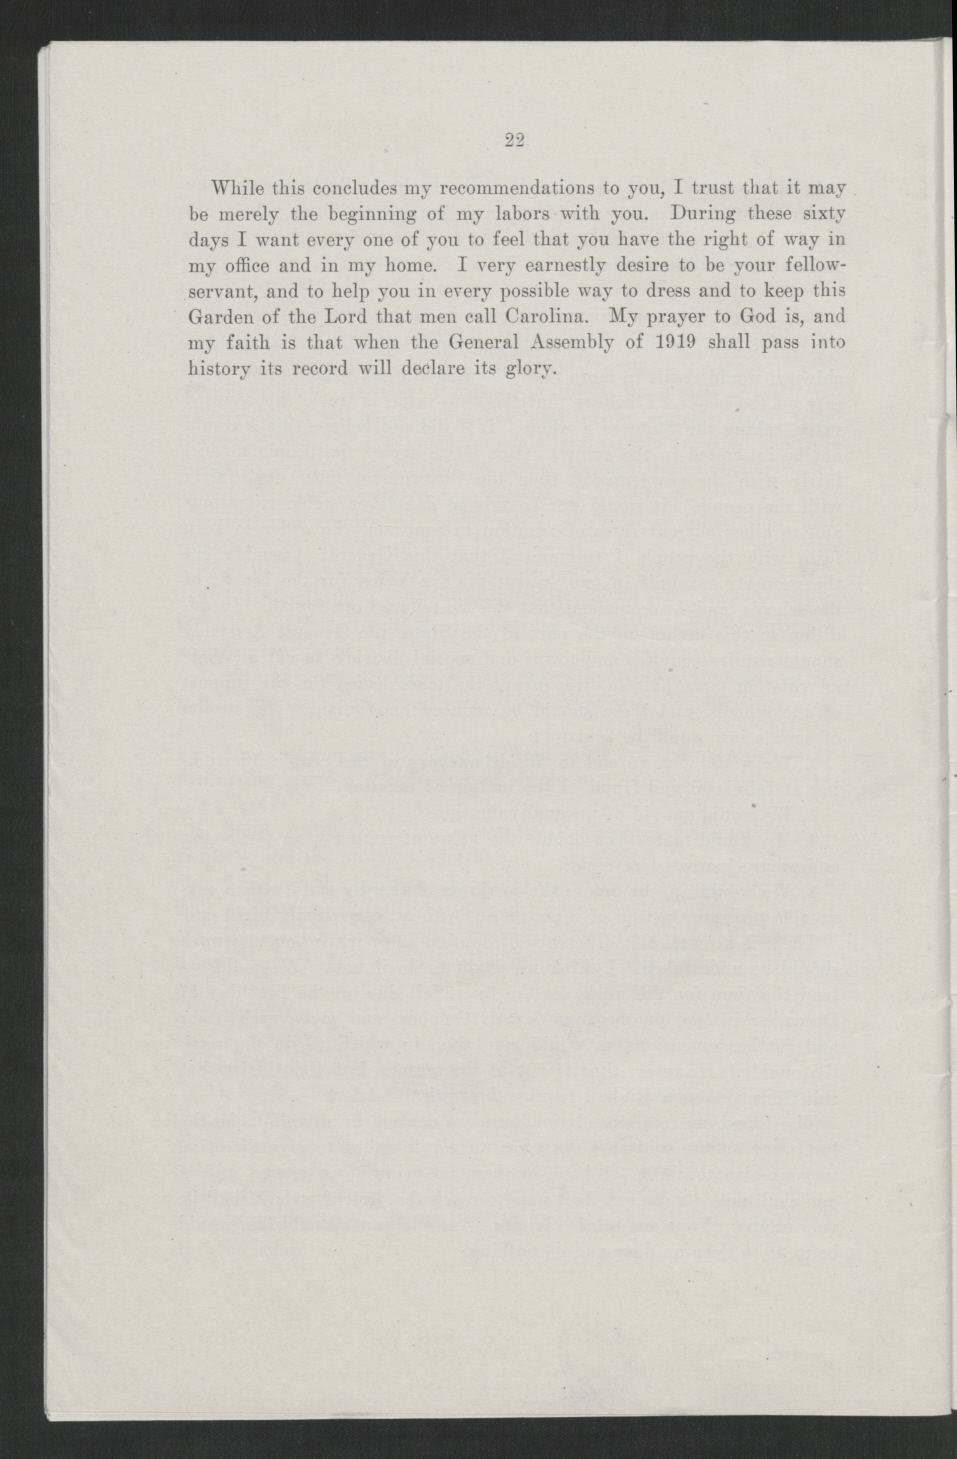 Biennial Message of Governor Thomas W. Bickett to the General Assembly, January 9, 1919, page 20